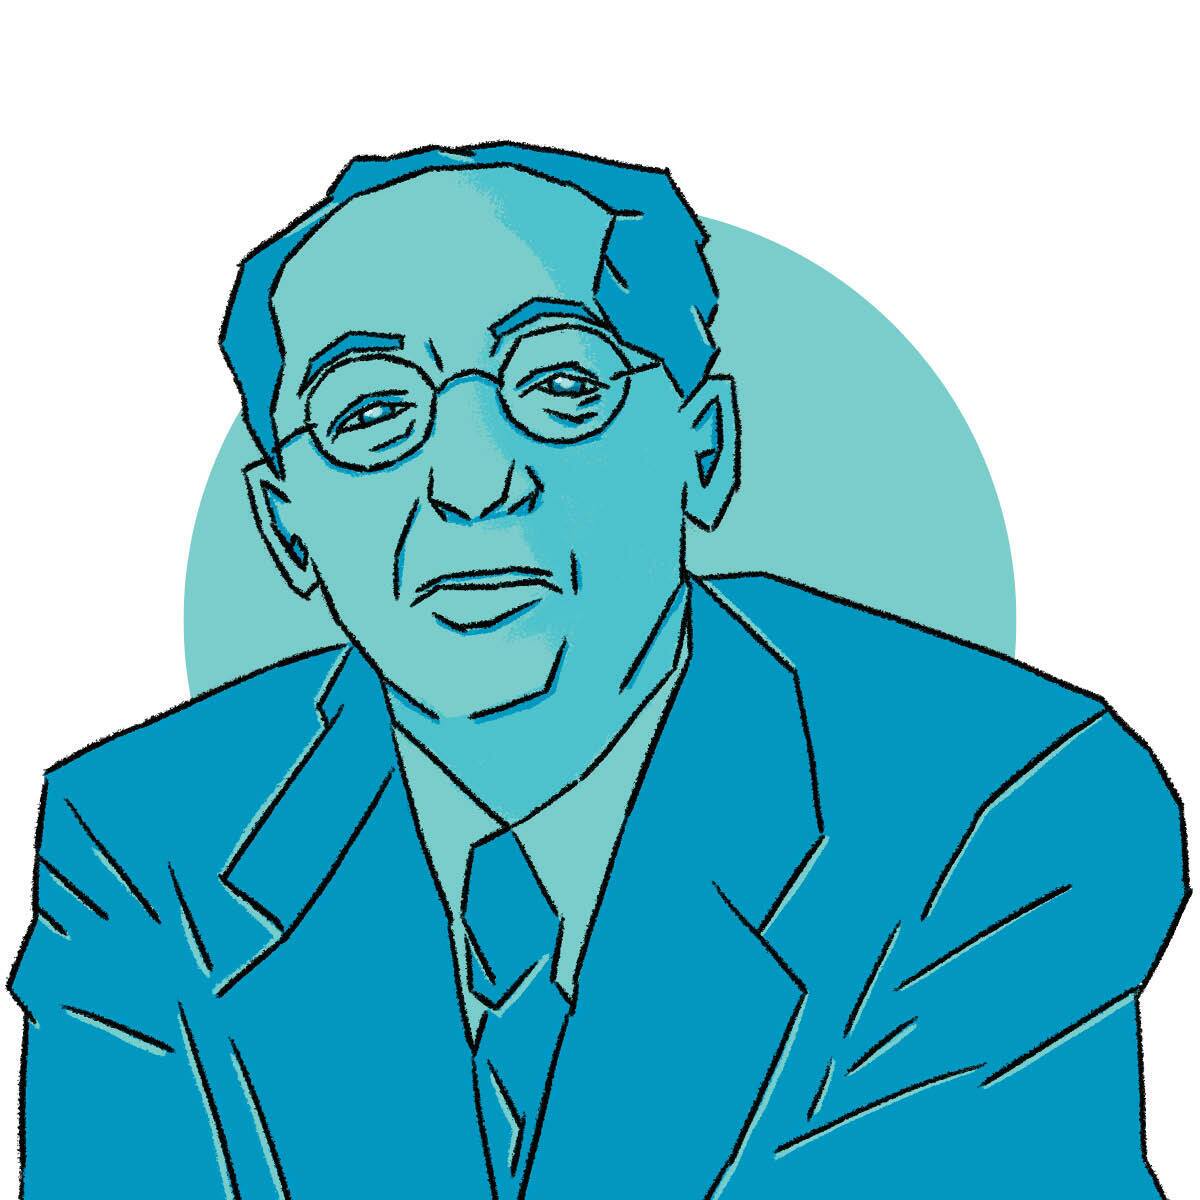 Aaron Copland, depicted in an illustration, invented what became known as the "American sound."